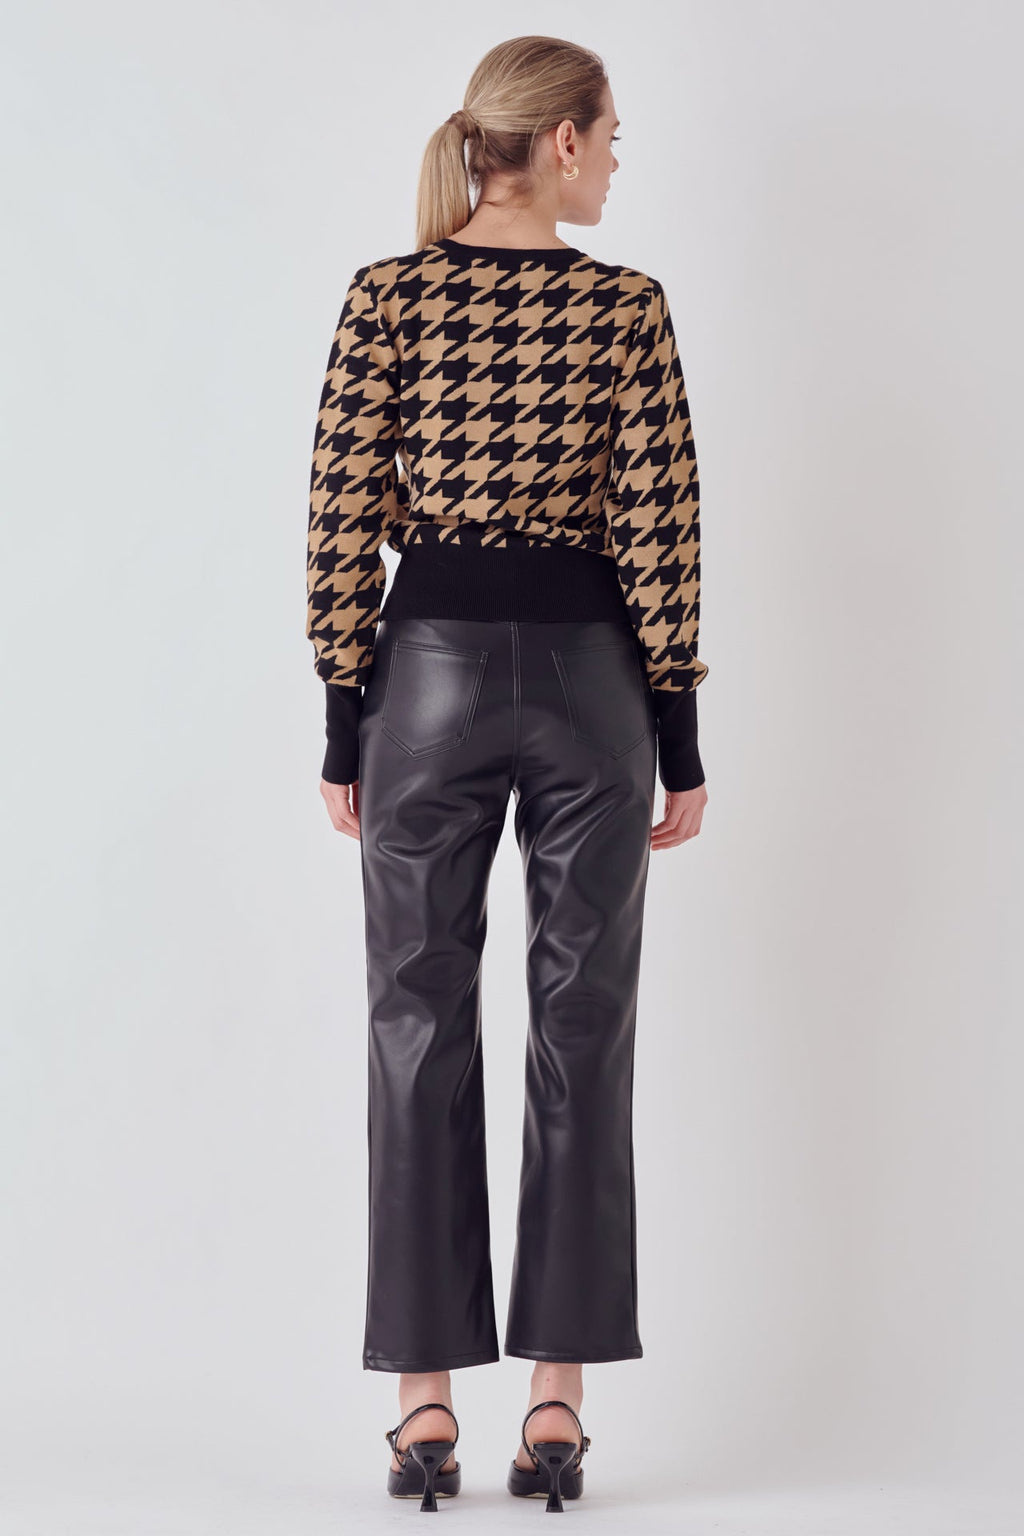 ENDLESS ROSE-Knit Houndstooth Sweater-TOPS available at Objectrare